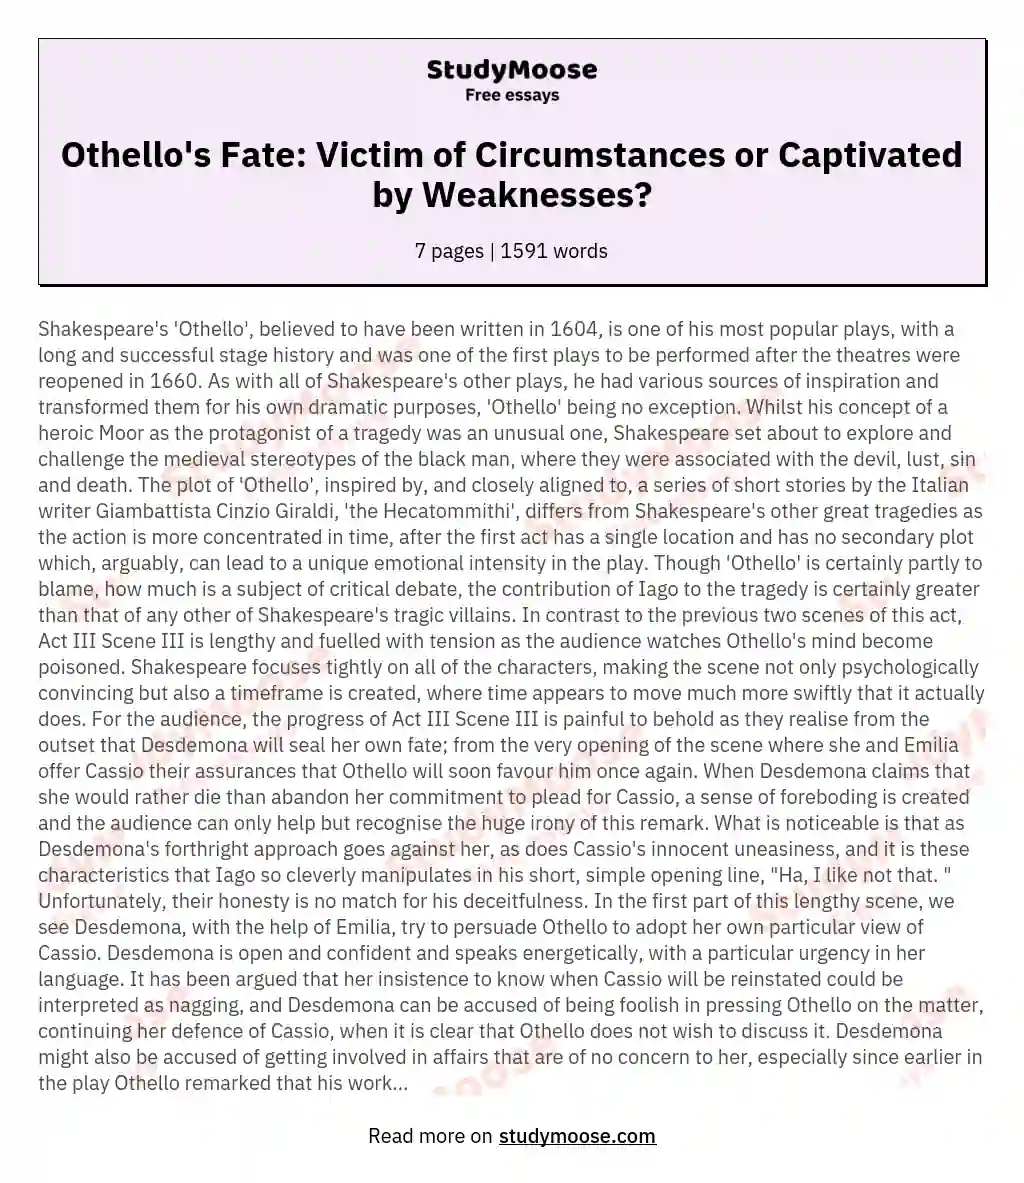 Othello's Fate: Victim of Circumstances or Captivated by Weaknesses?